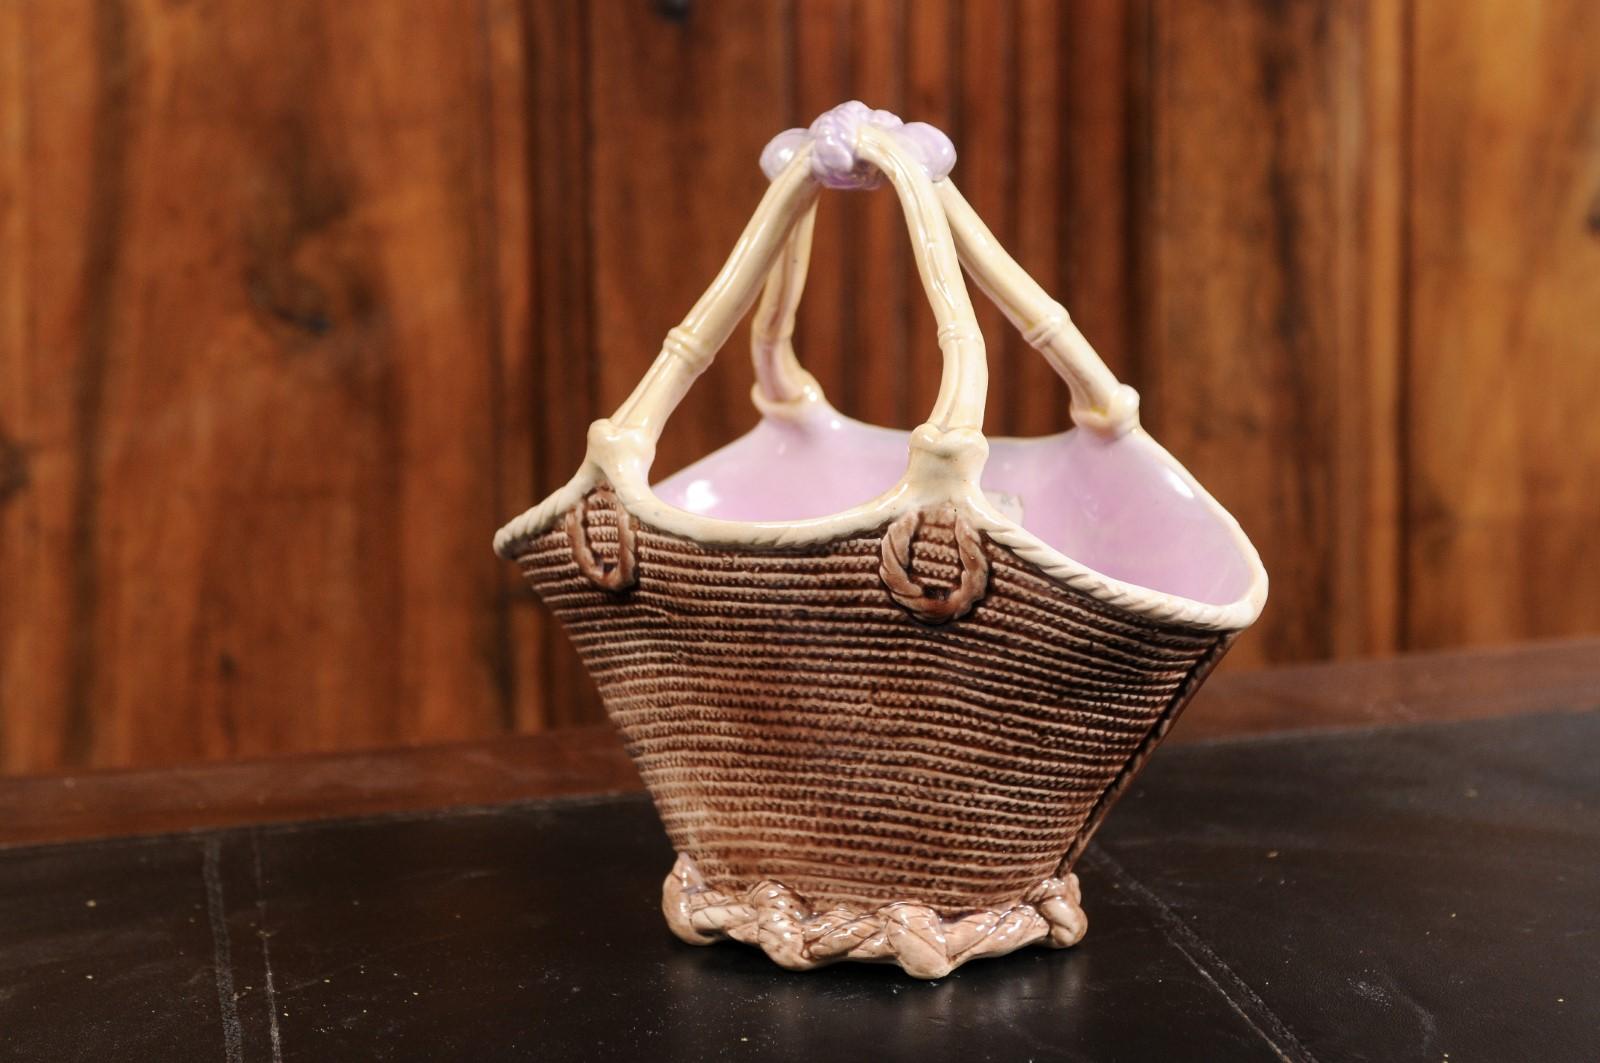 A French majolica porcelain basket from the 19th century, with wicker theme and pink glaze. Created in France during the 19th century, this majolica porcelain basket features a wicker inspired body with bamboo style handles, tied together with a